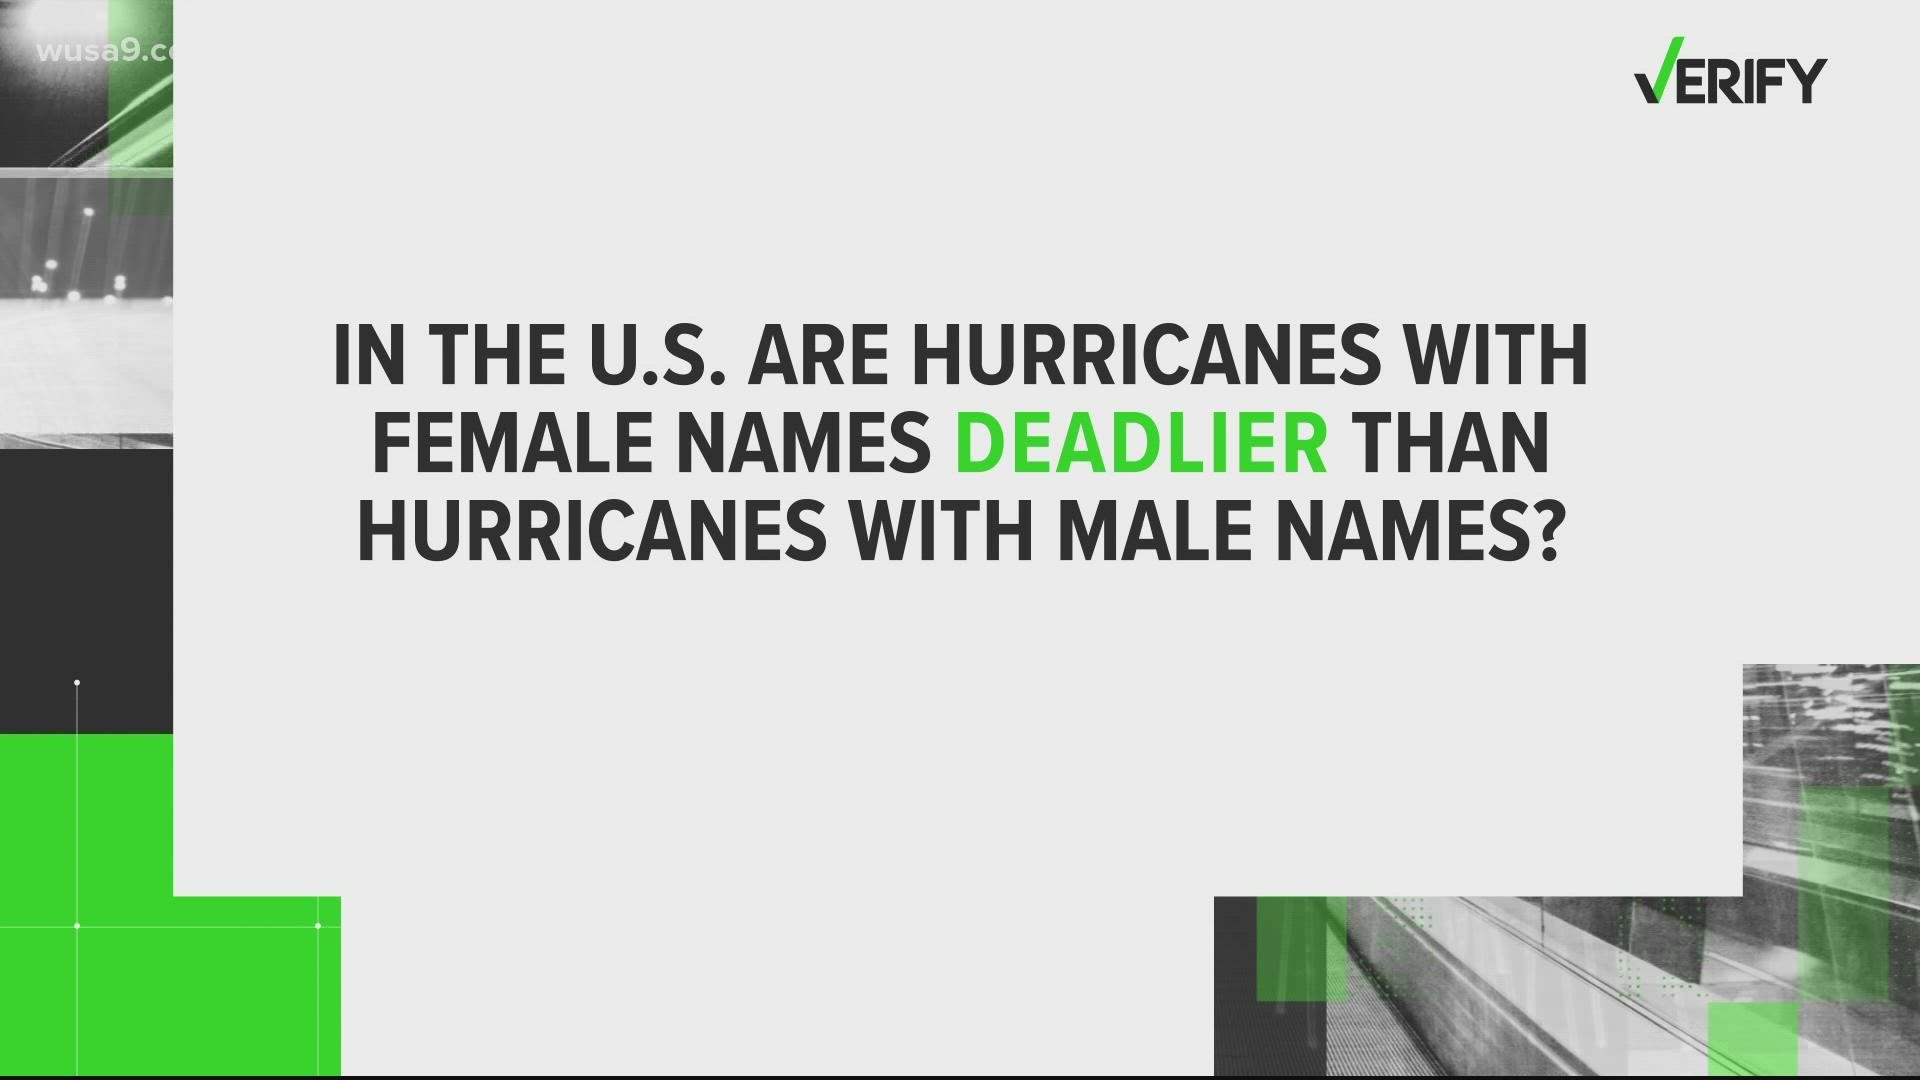 This claim traces back to a 2014 study, where researchers said female hurricanes caused three times as many deaths. Our VERIFY team provides context